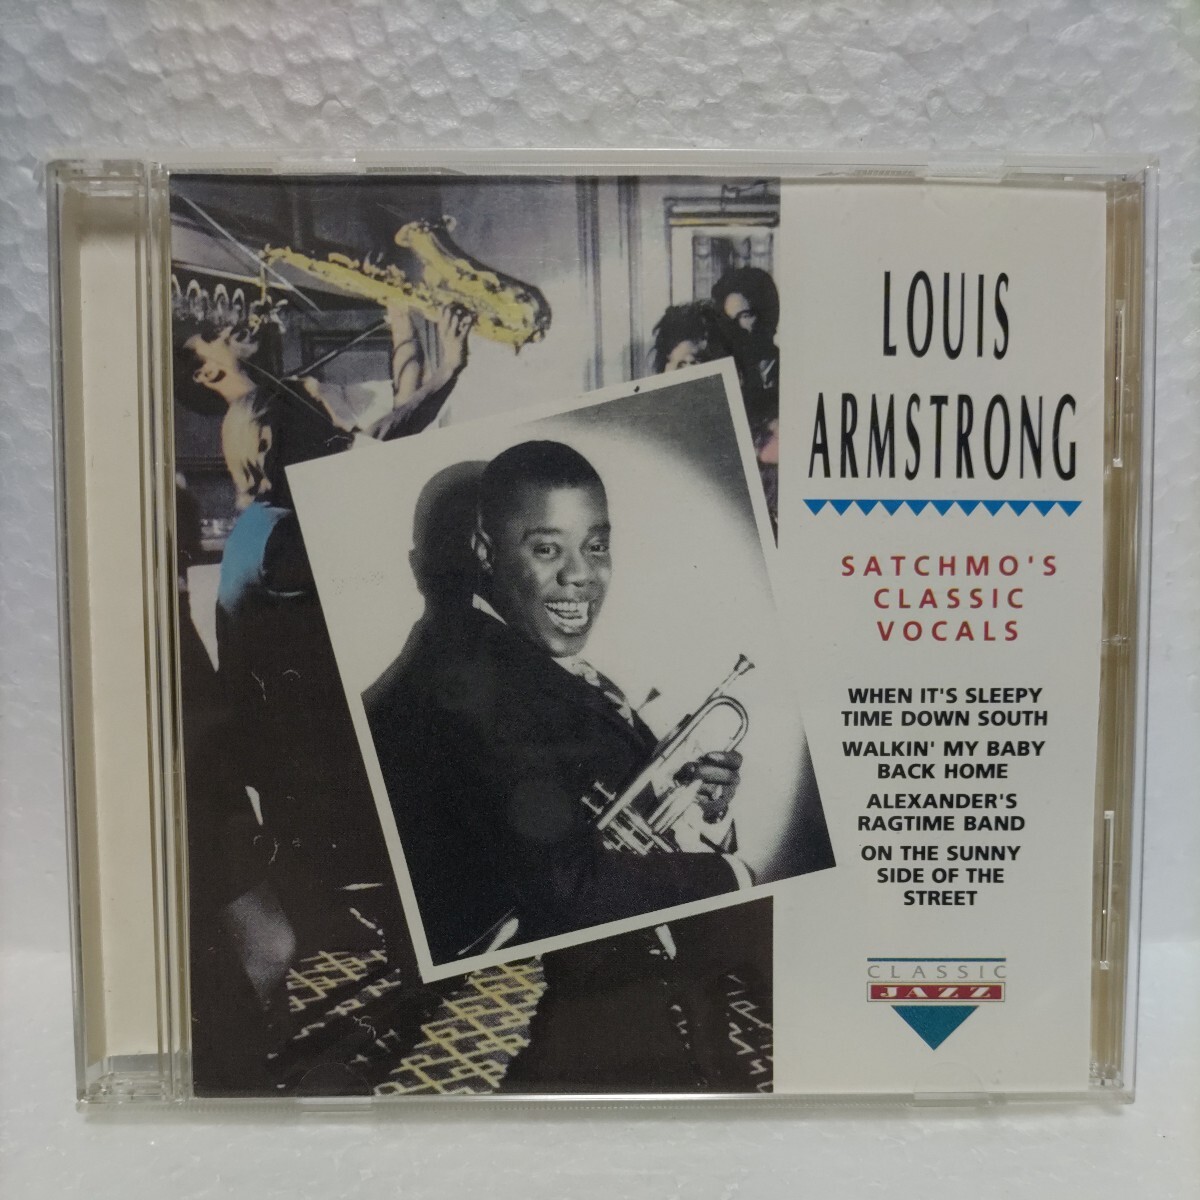 Louis Armstrong / Satchmo's Classic Vocals / ルイ・アームストロング / サッチモズ・クラシック・ボーカルズ_画像1